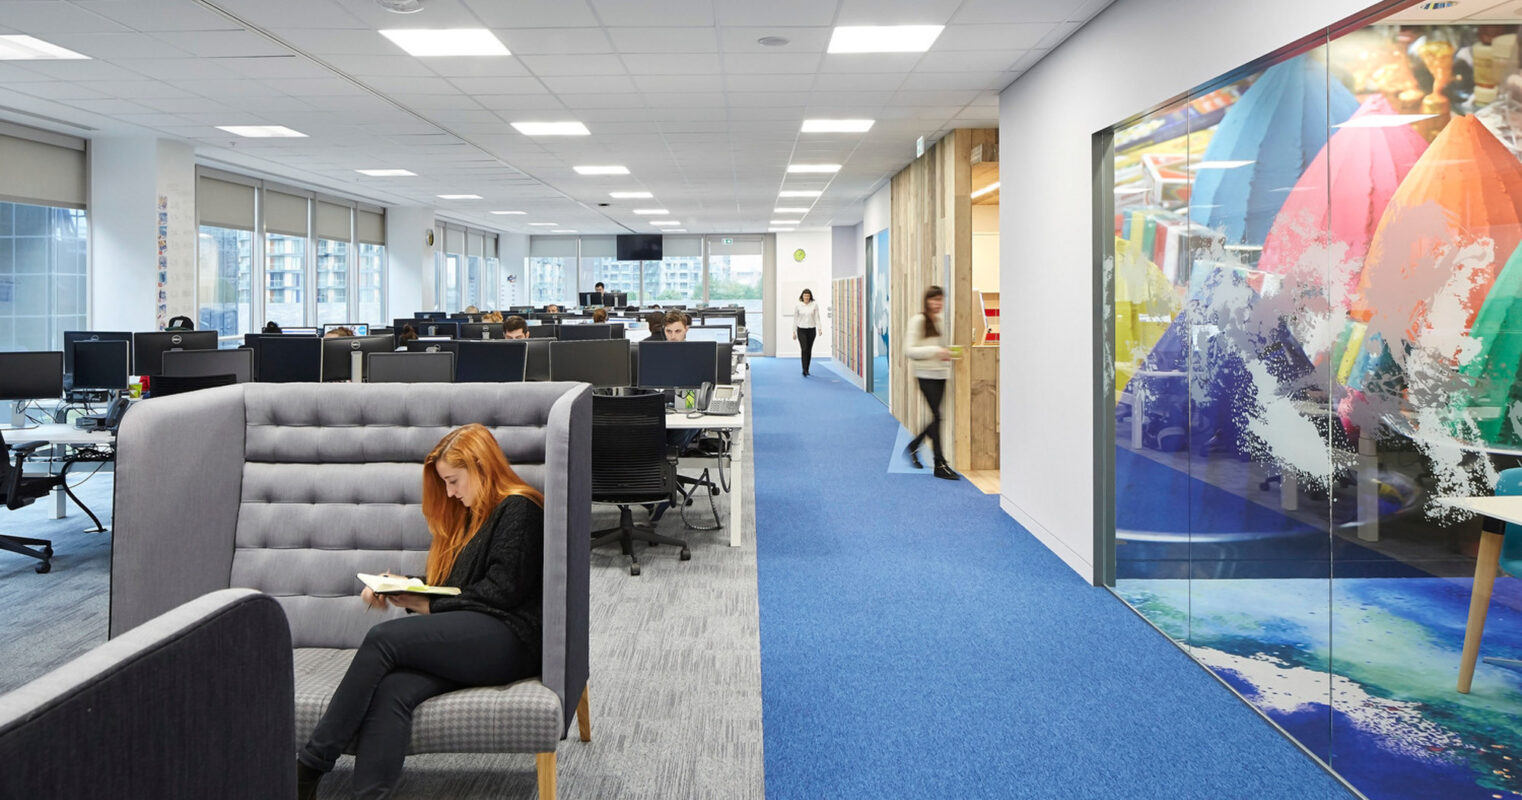 Modern open-plan office space with ergonomic chairs and workstations, accented by vibrant blue carpeting. High-backed gray acoustic sofas provide informal meeting spots, while colorful abstract wall art contributes to an energetic atmosphere. Glass-walled meeting rooms enhance the sense of openness and connectivity.